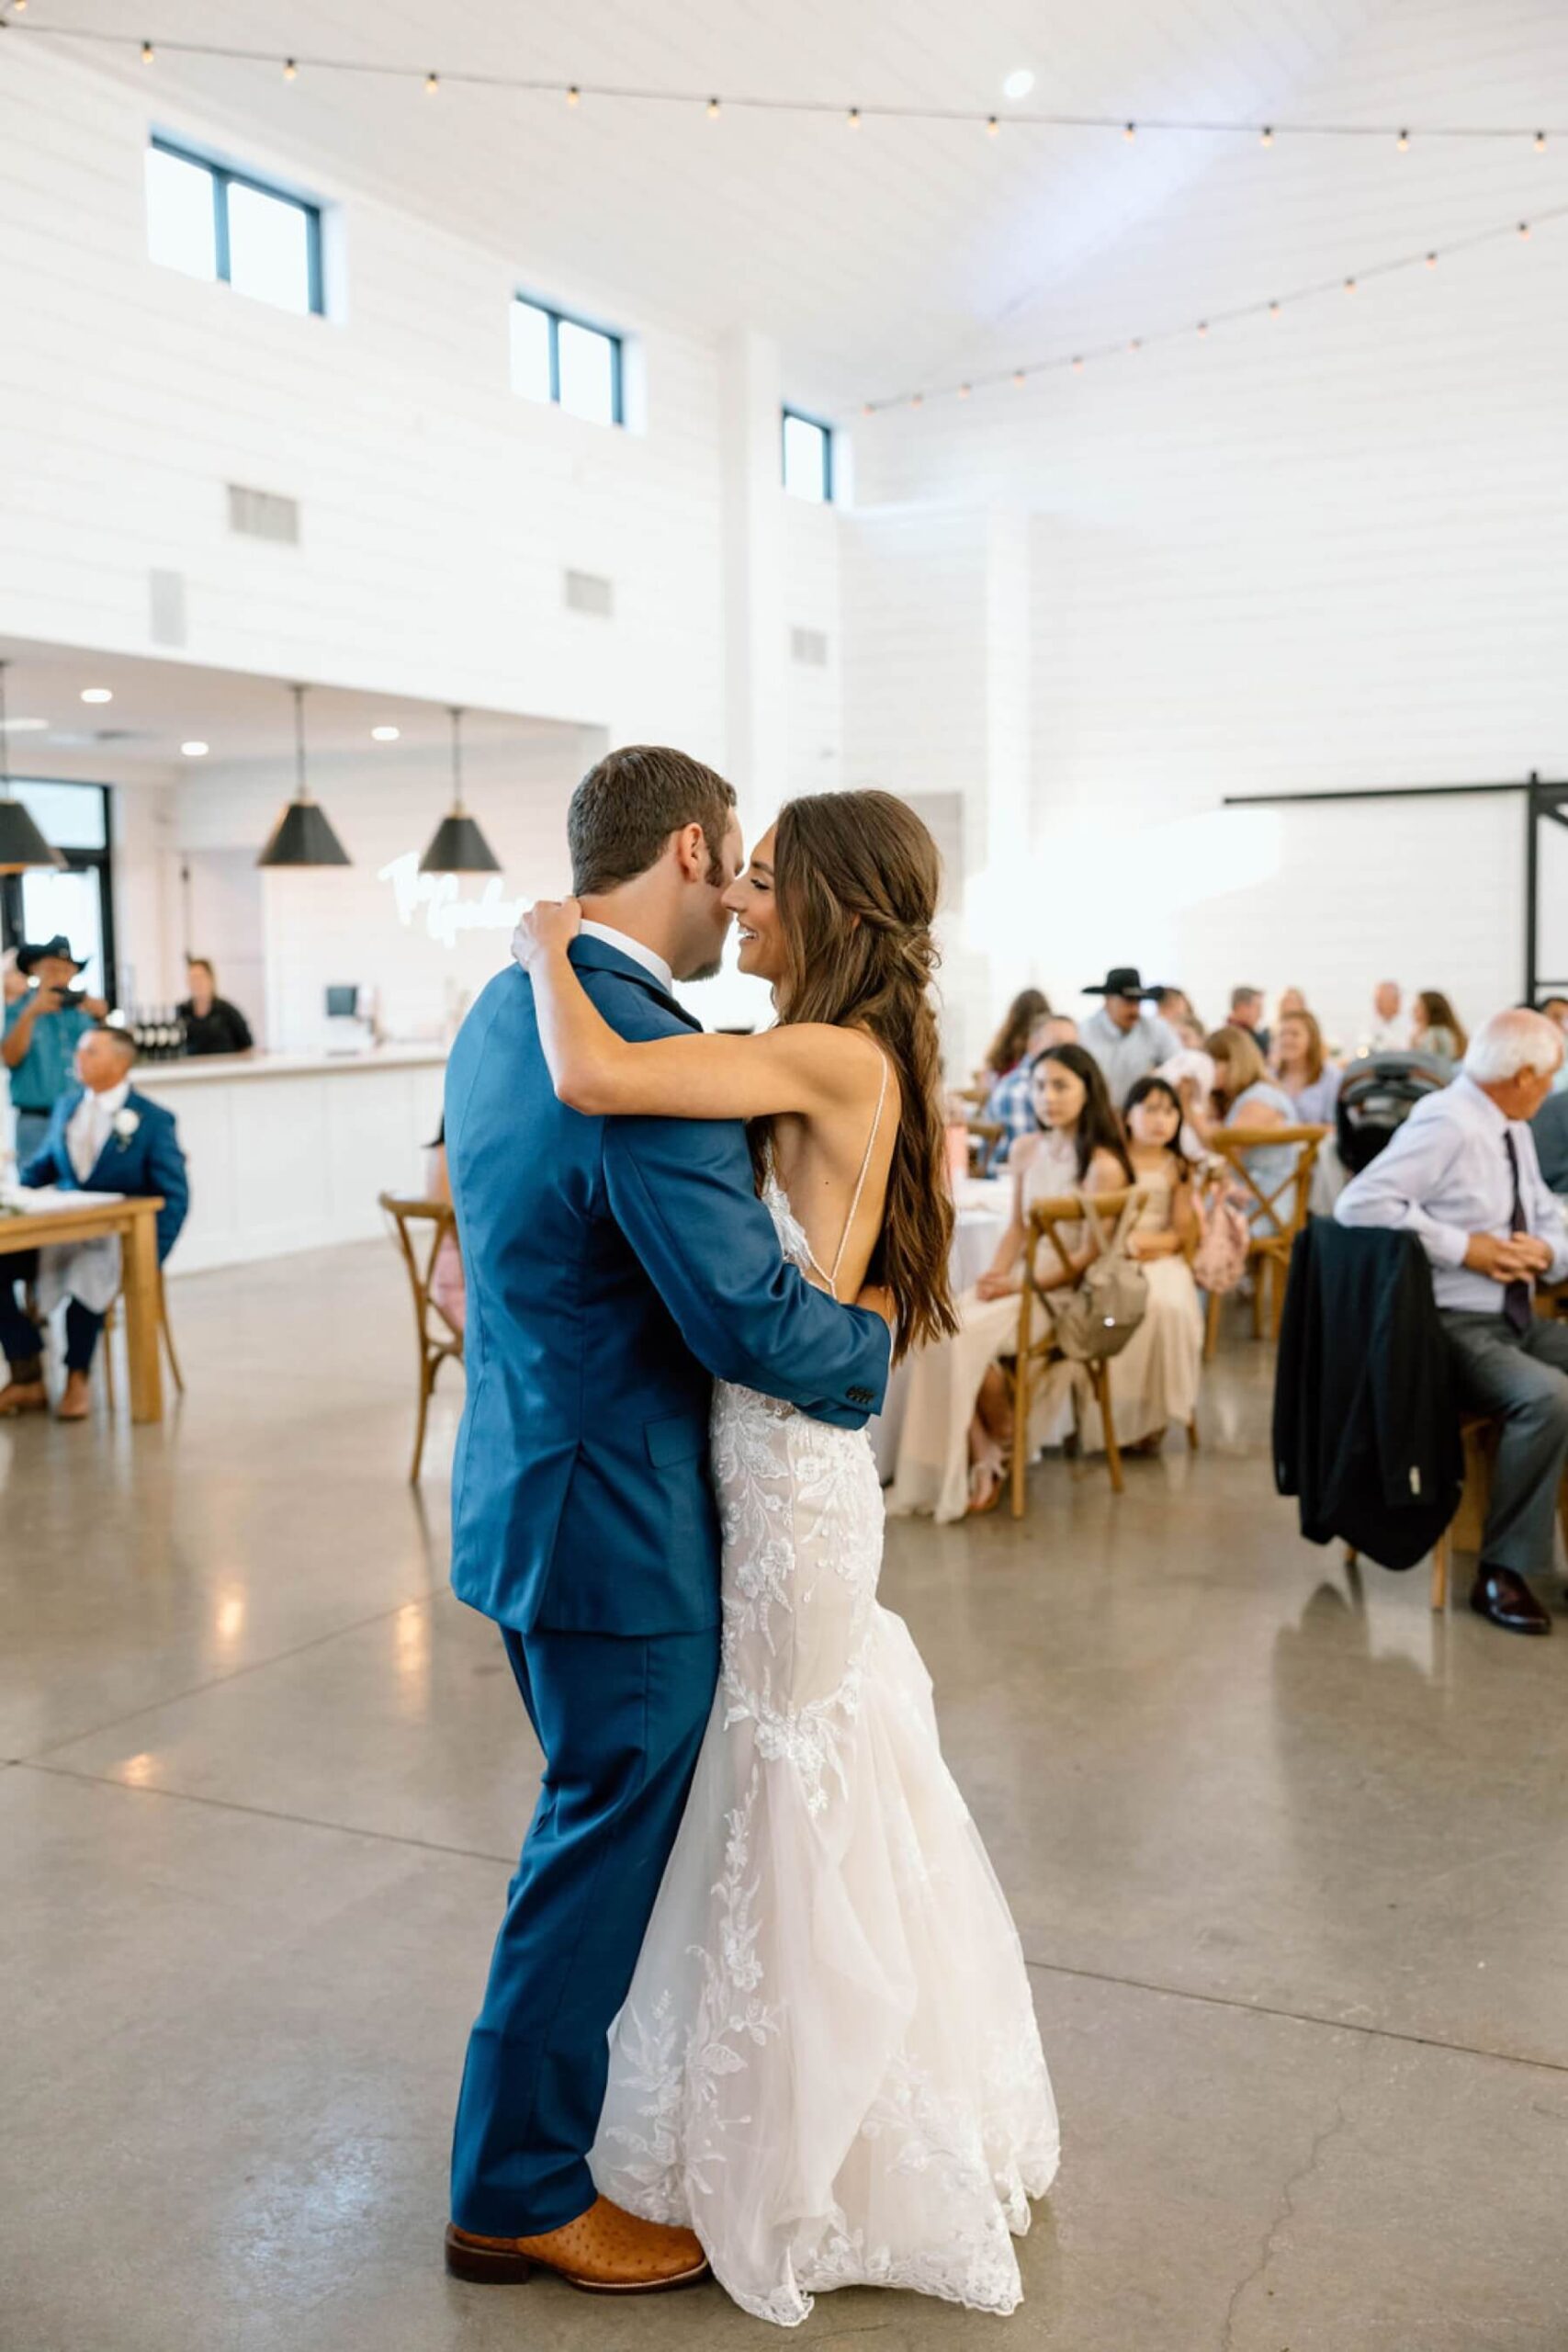 Bride and groom's first dance at The Gardenia